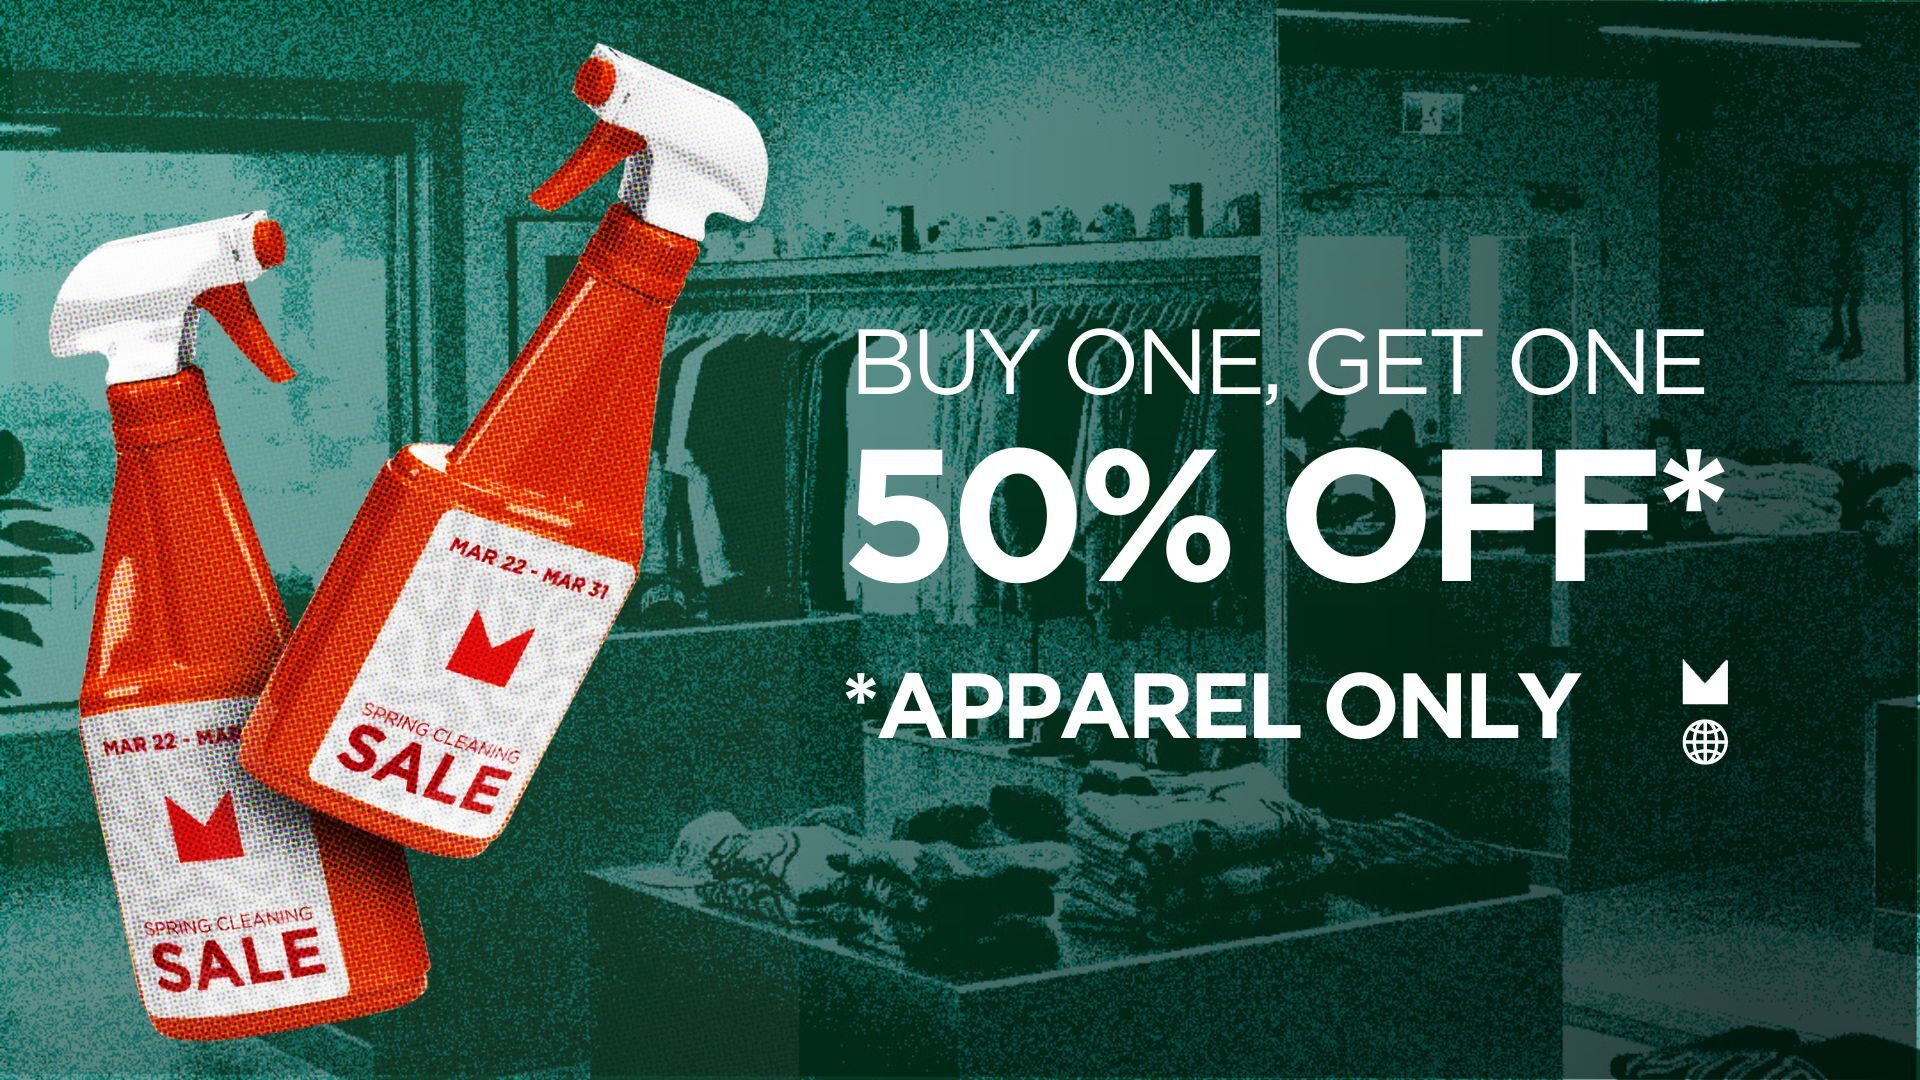 Spring Cleaning Sale - Buy one / Get one 50% off apparel